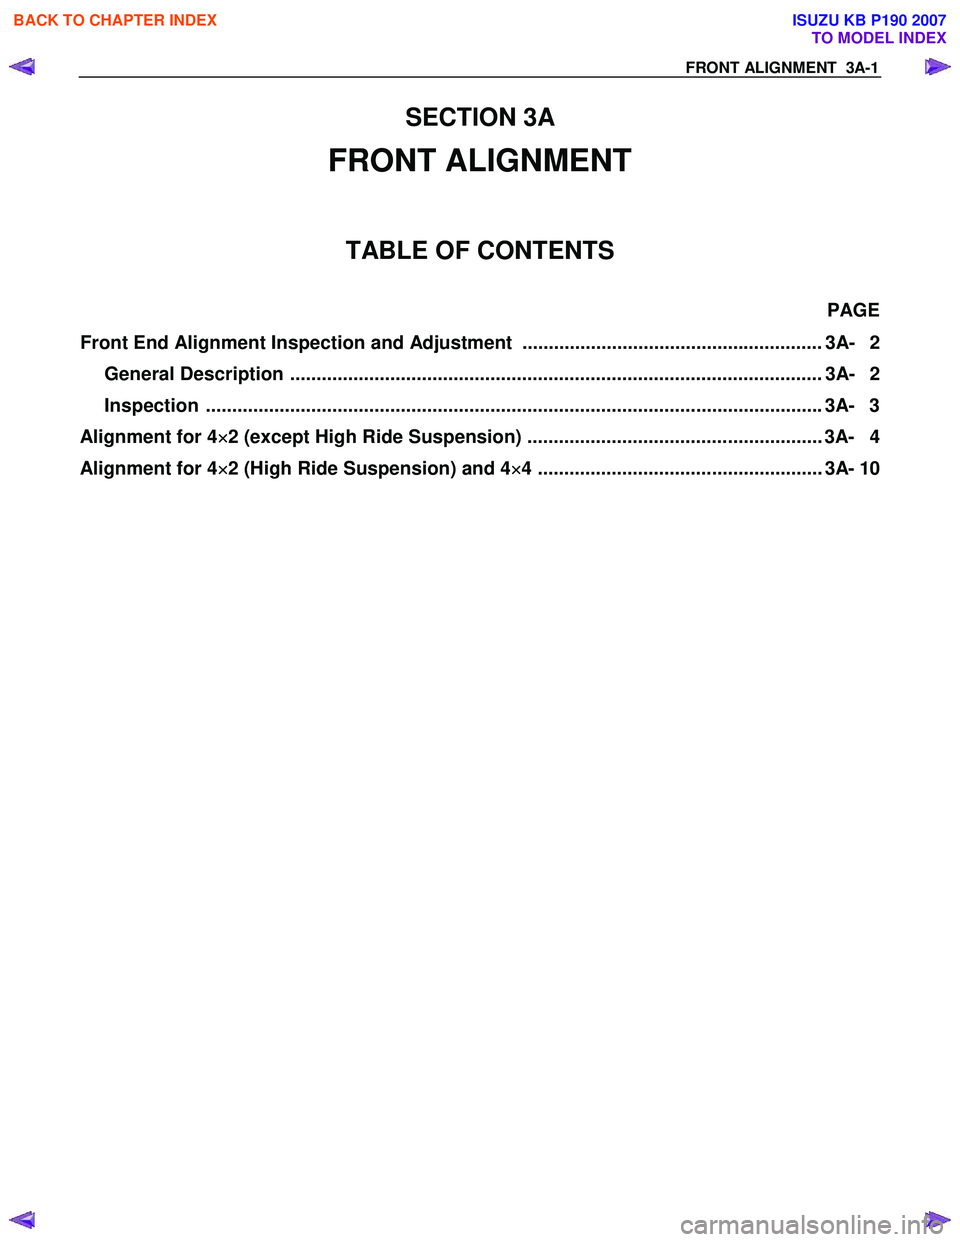 ISUZU KB P190 2007  Workshop Repair Manual 2 2 
×
×× 
×
4 
×
××
×
×
××
×
F
R O NT  ALIG NM EN T   3A -1  
SECTIO N 3A  
FRONT ALIGNMENT 
TABLE OF CONTENTS 
Front  End A lignment  Inspection and A dju st ment  ......................